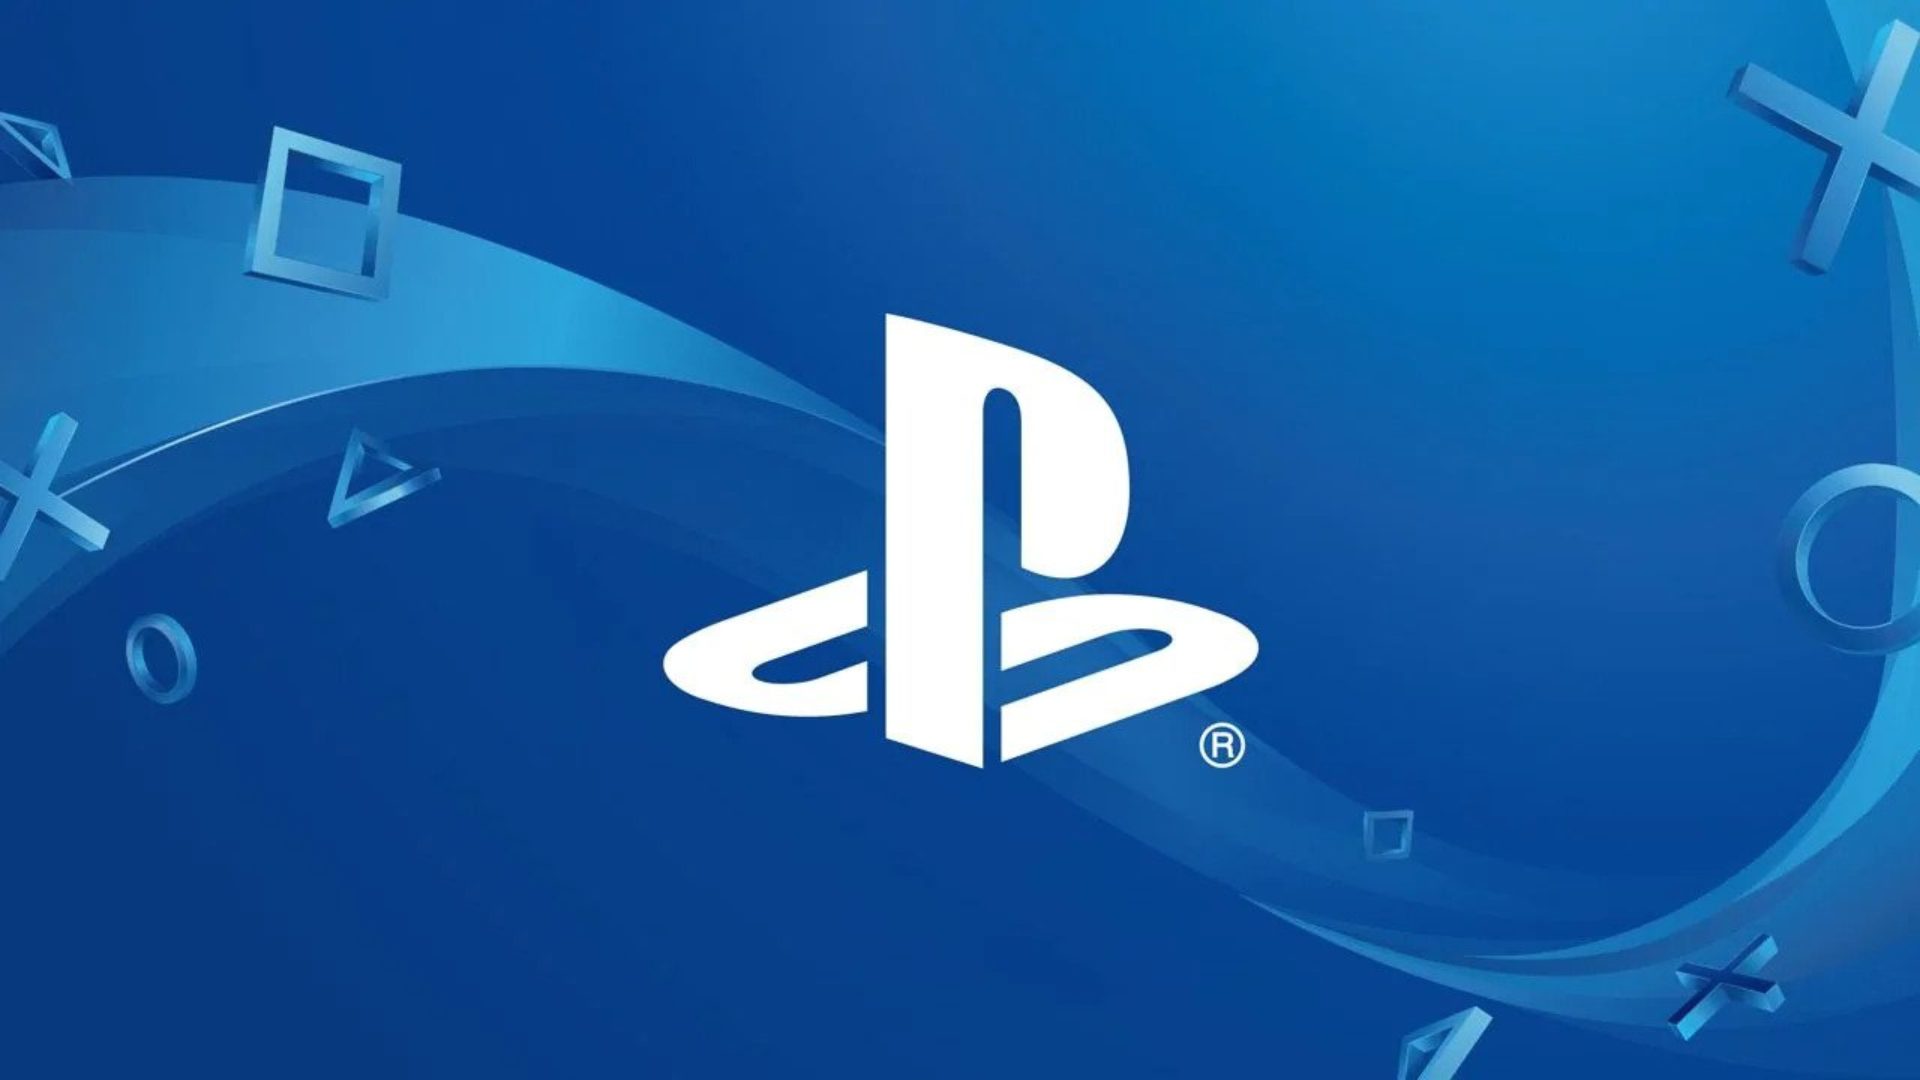 Sony withdraws direct payment options

